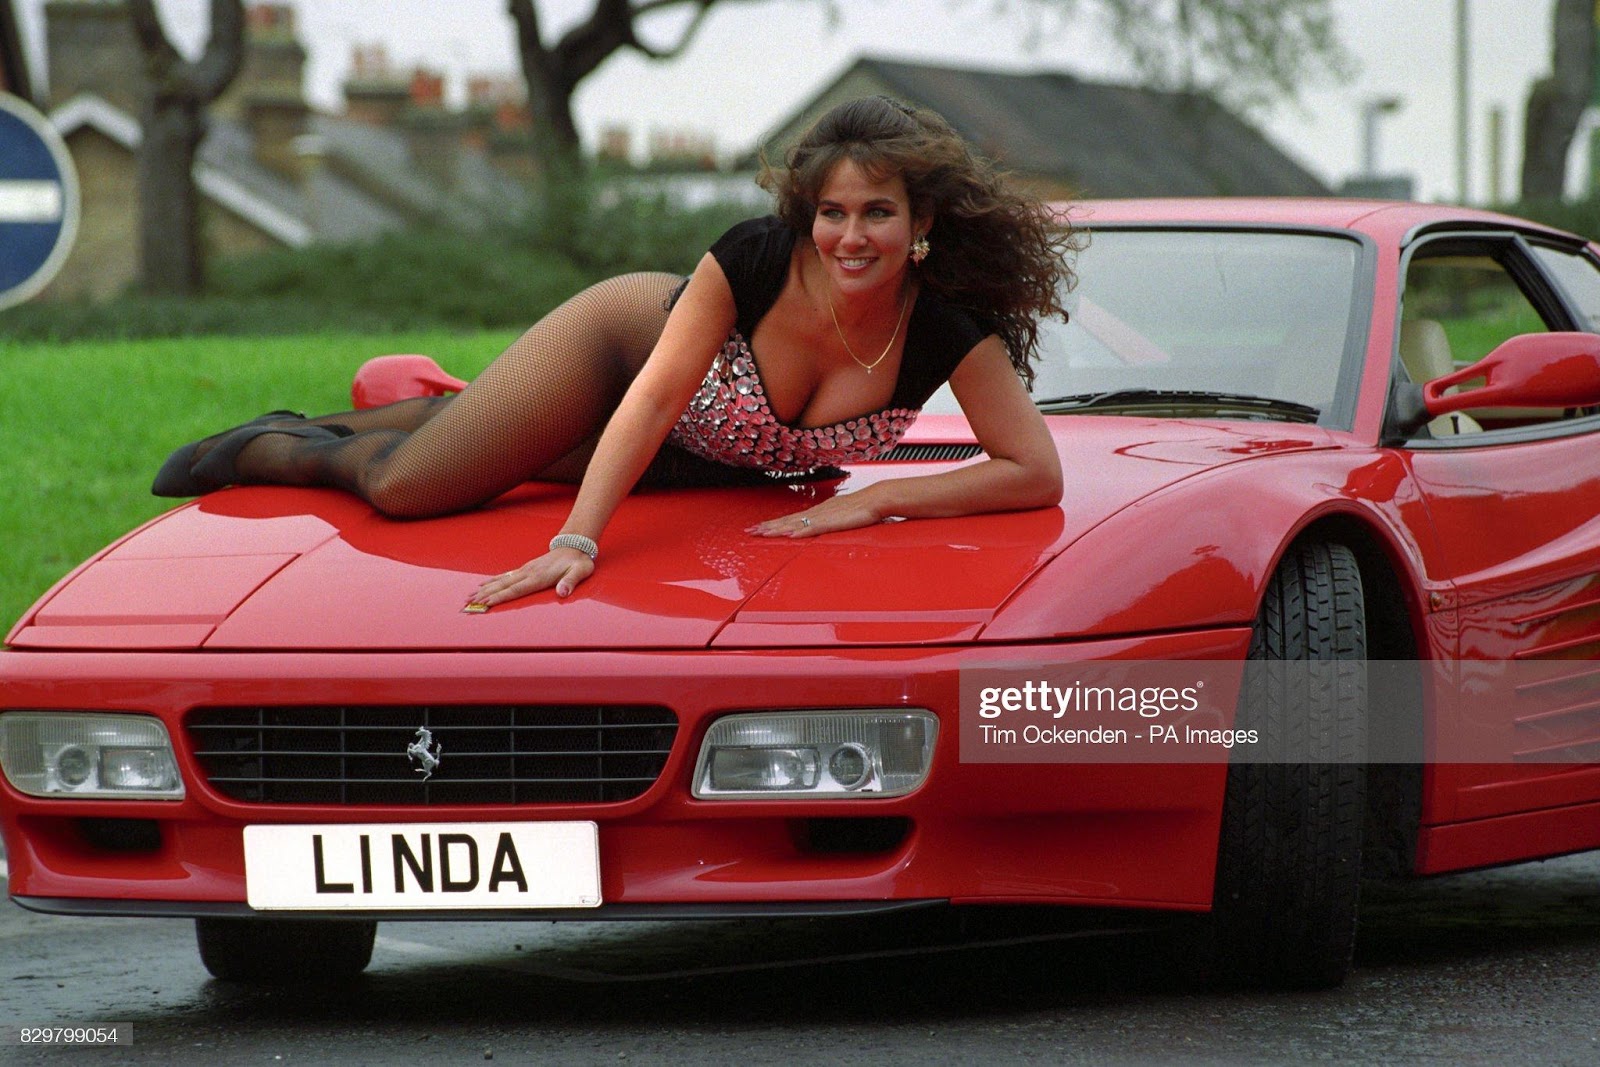 D:\Documenti\posts\posts\Women and motorsport\foto\1993\1993 lying-on-a-ferrari-linda-lusardi-poses-with-the-number-plate-l1-nda-picture-id829799054.jpg